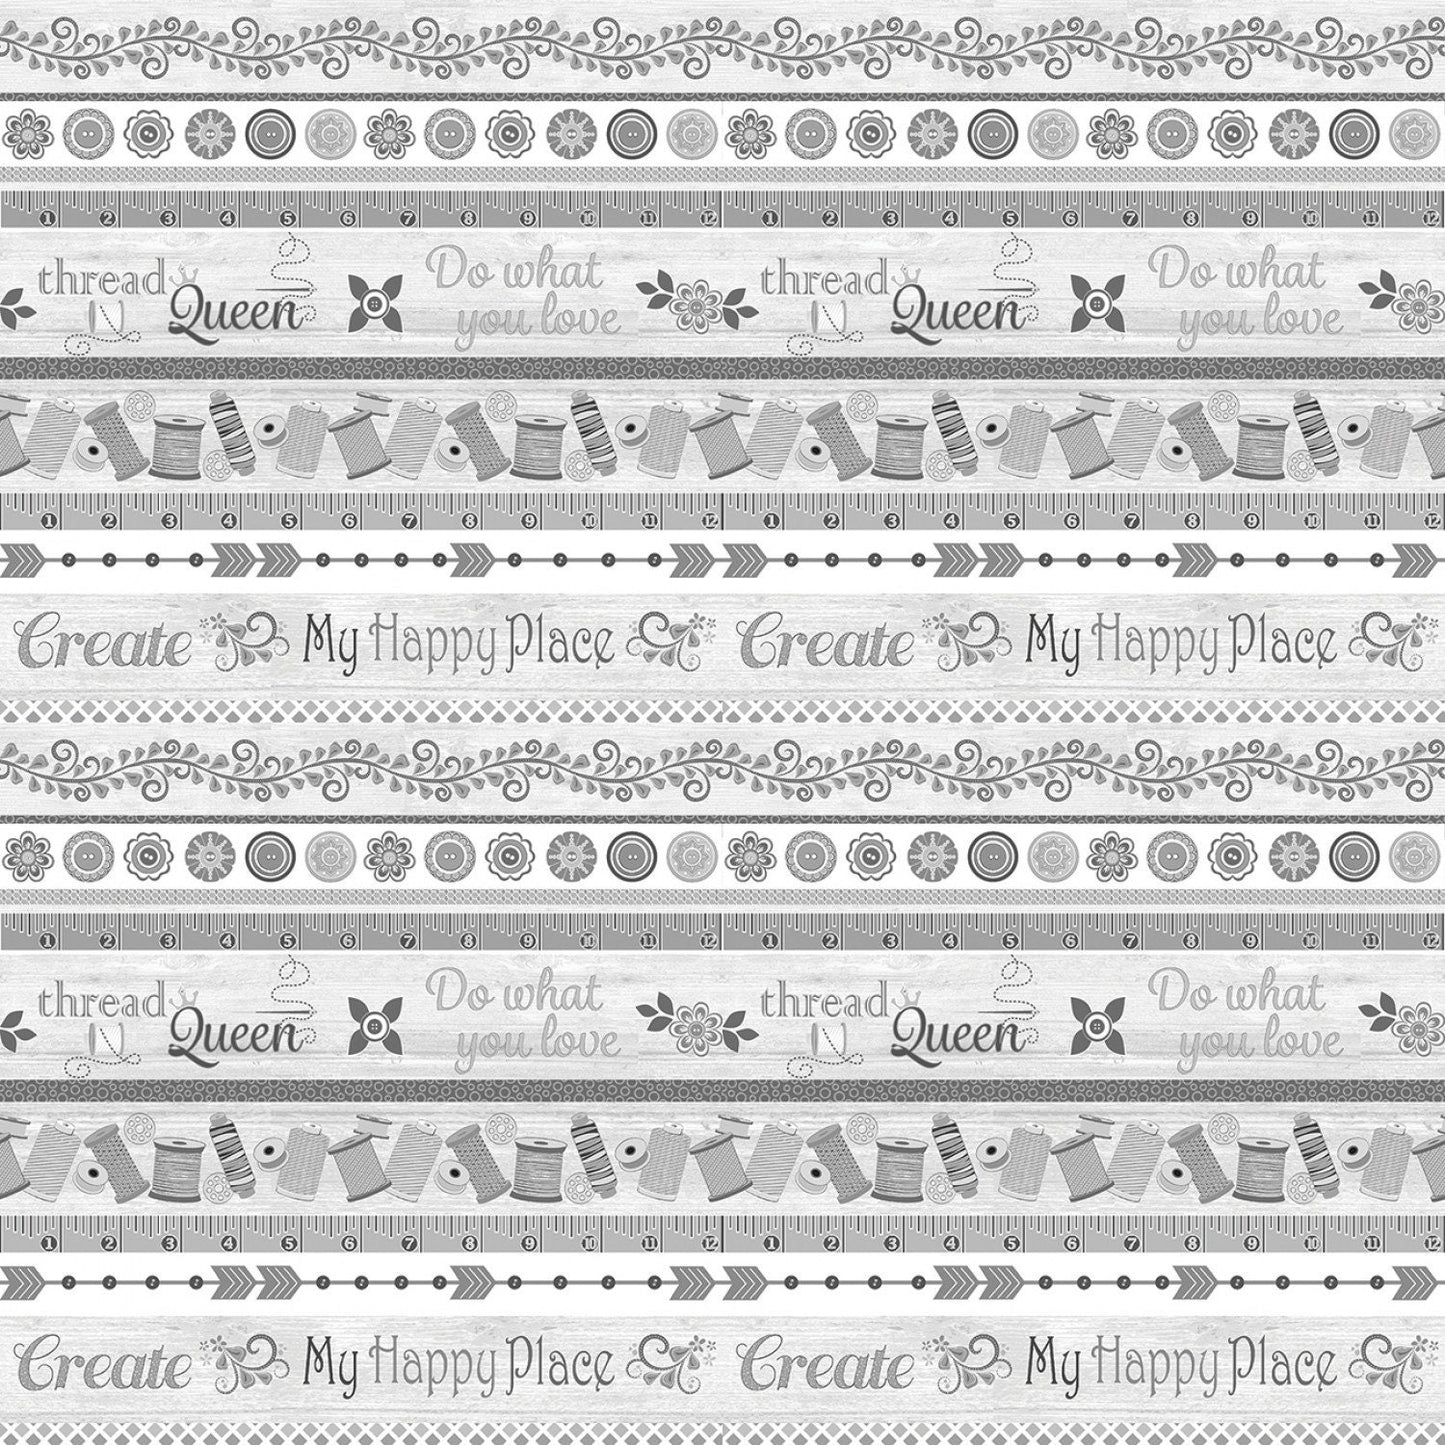 My Happy Place by Cherry Guidry Grey My Happy Place Border Stripe  7592B-11 Cotton Woven Fabrics